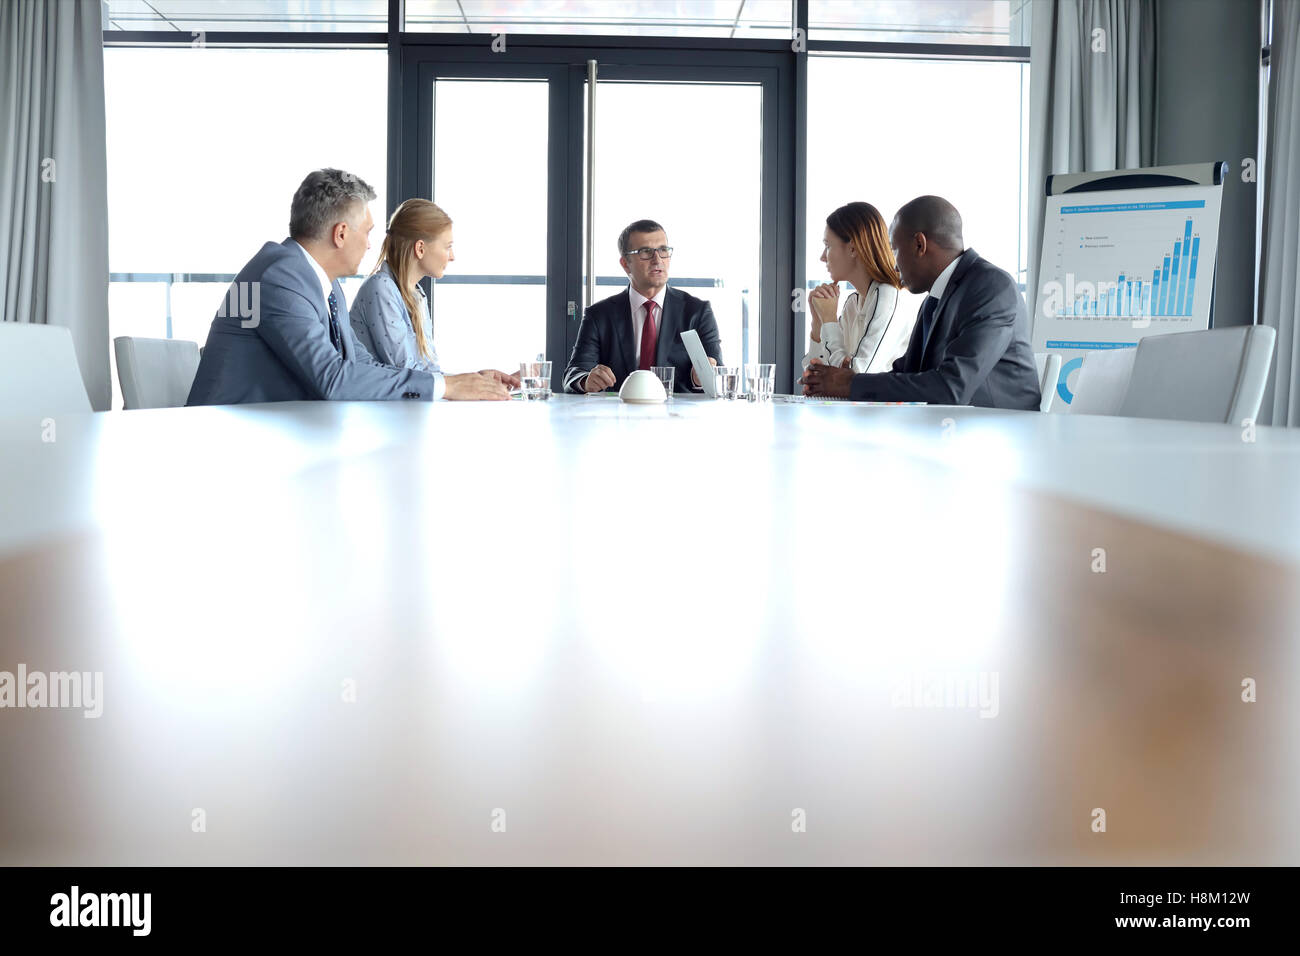 Multi-ethnic business people at conference table Banque D'Images